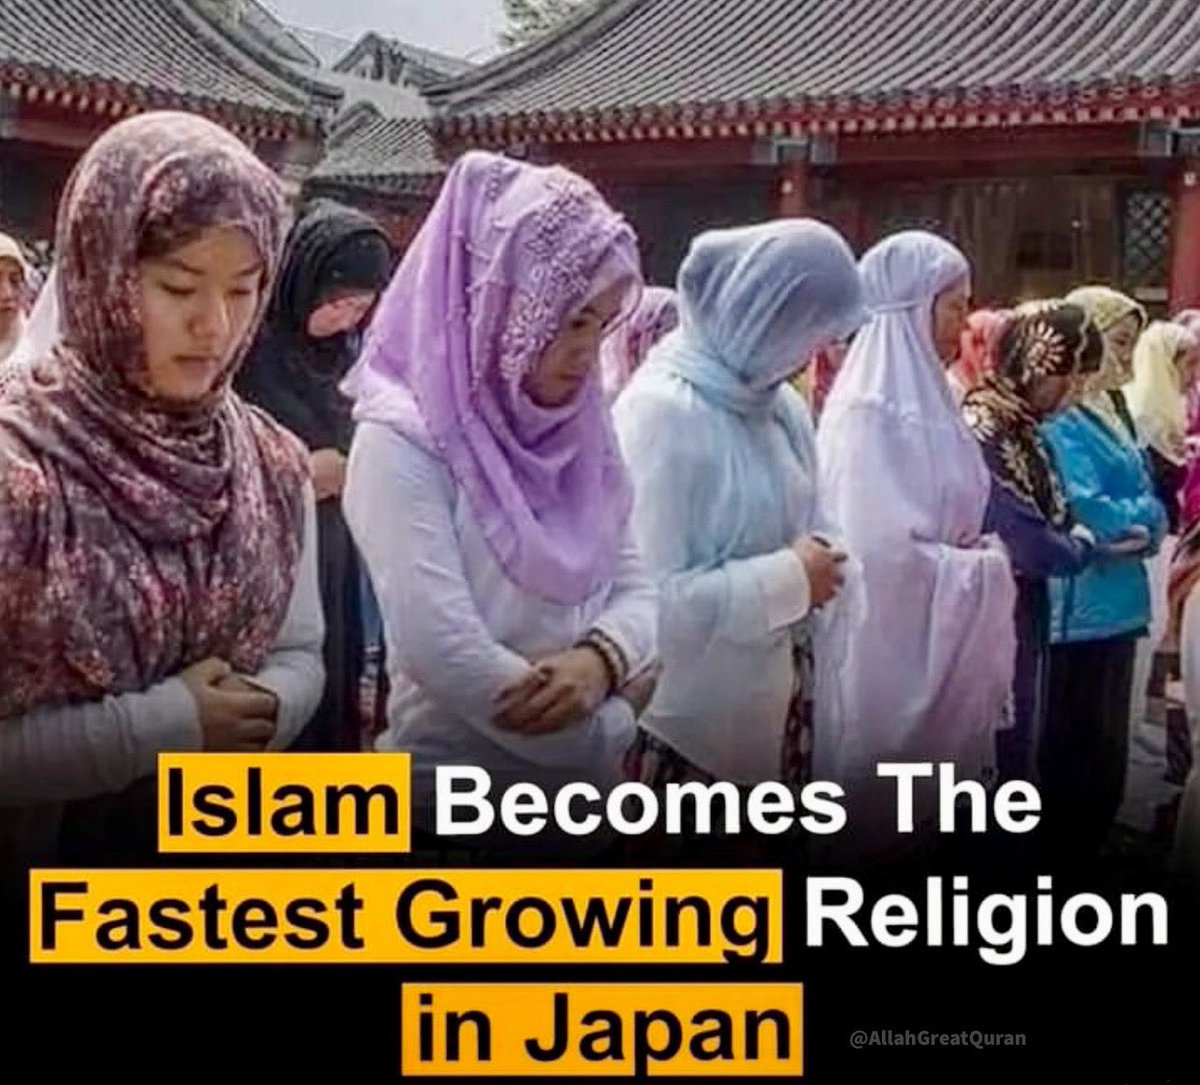 Japan is headed in the right direction.